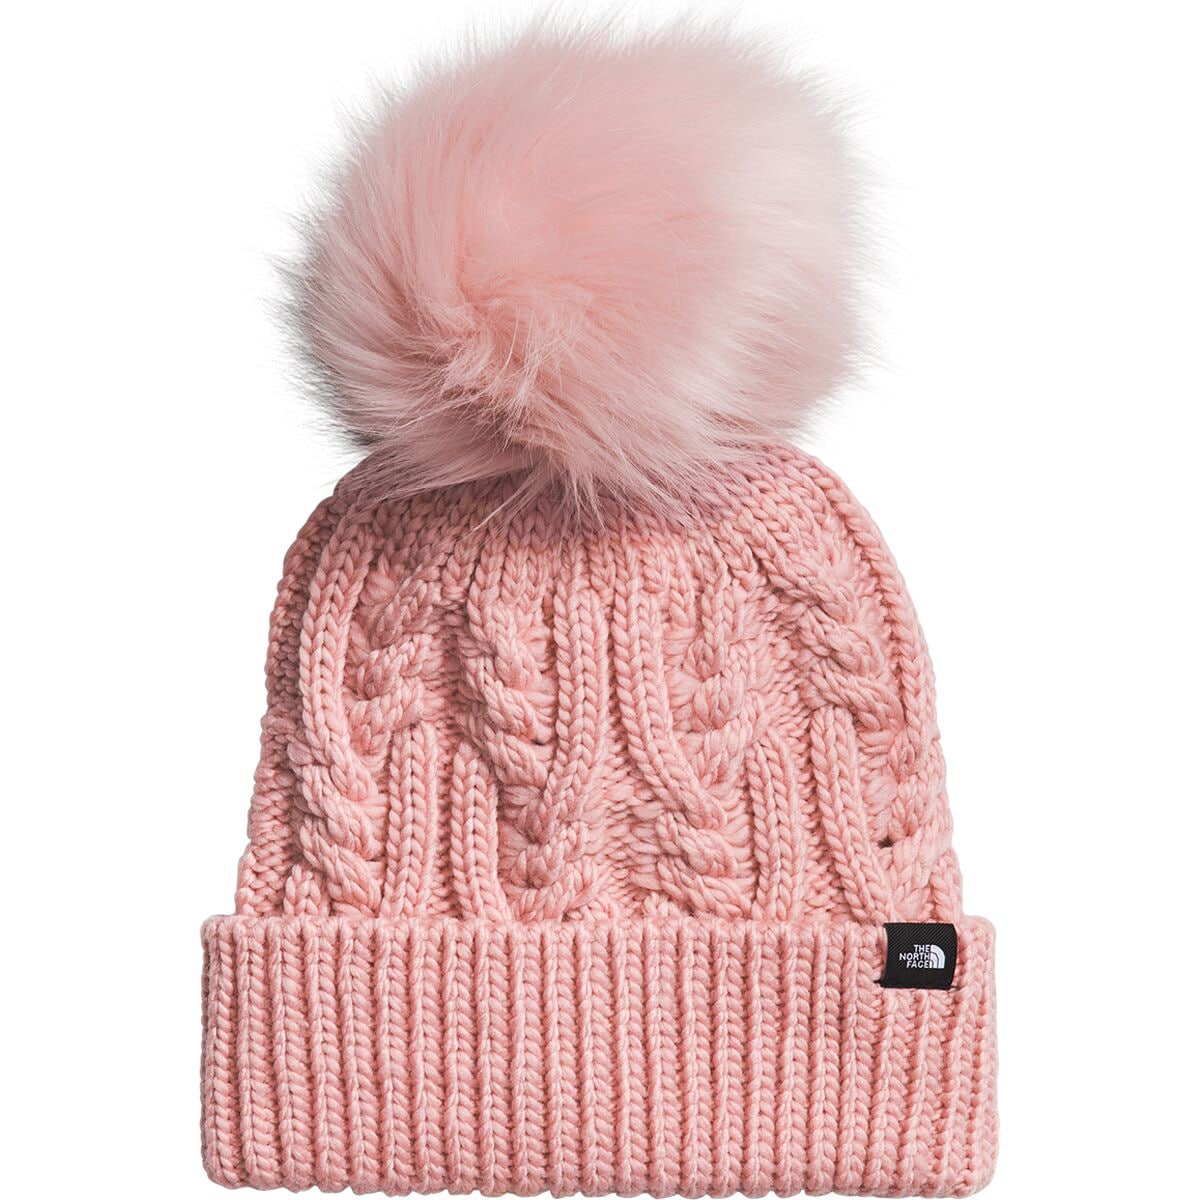 Шапка-бини oh mega fur с помпоном, детская The North Face, розовый 10cm fur ball key chain fur pompoms hat winter hats fur pom pom for shoes bag accessories with buttons